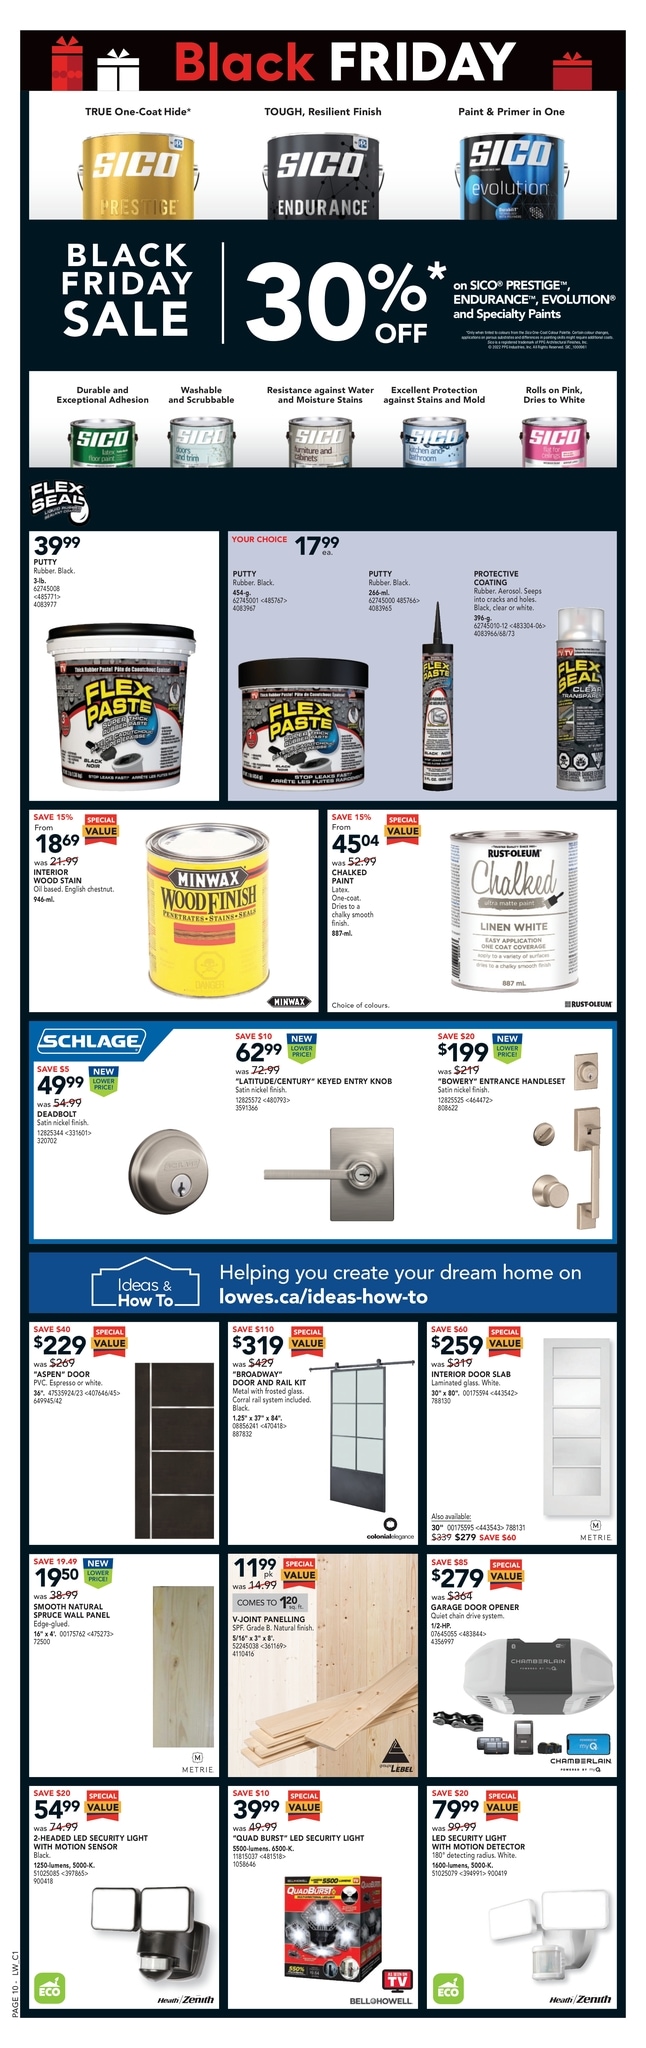 LOWE'S - Weekly Flyer Specials - Black Friday - Page 16